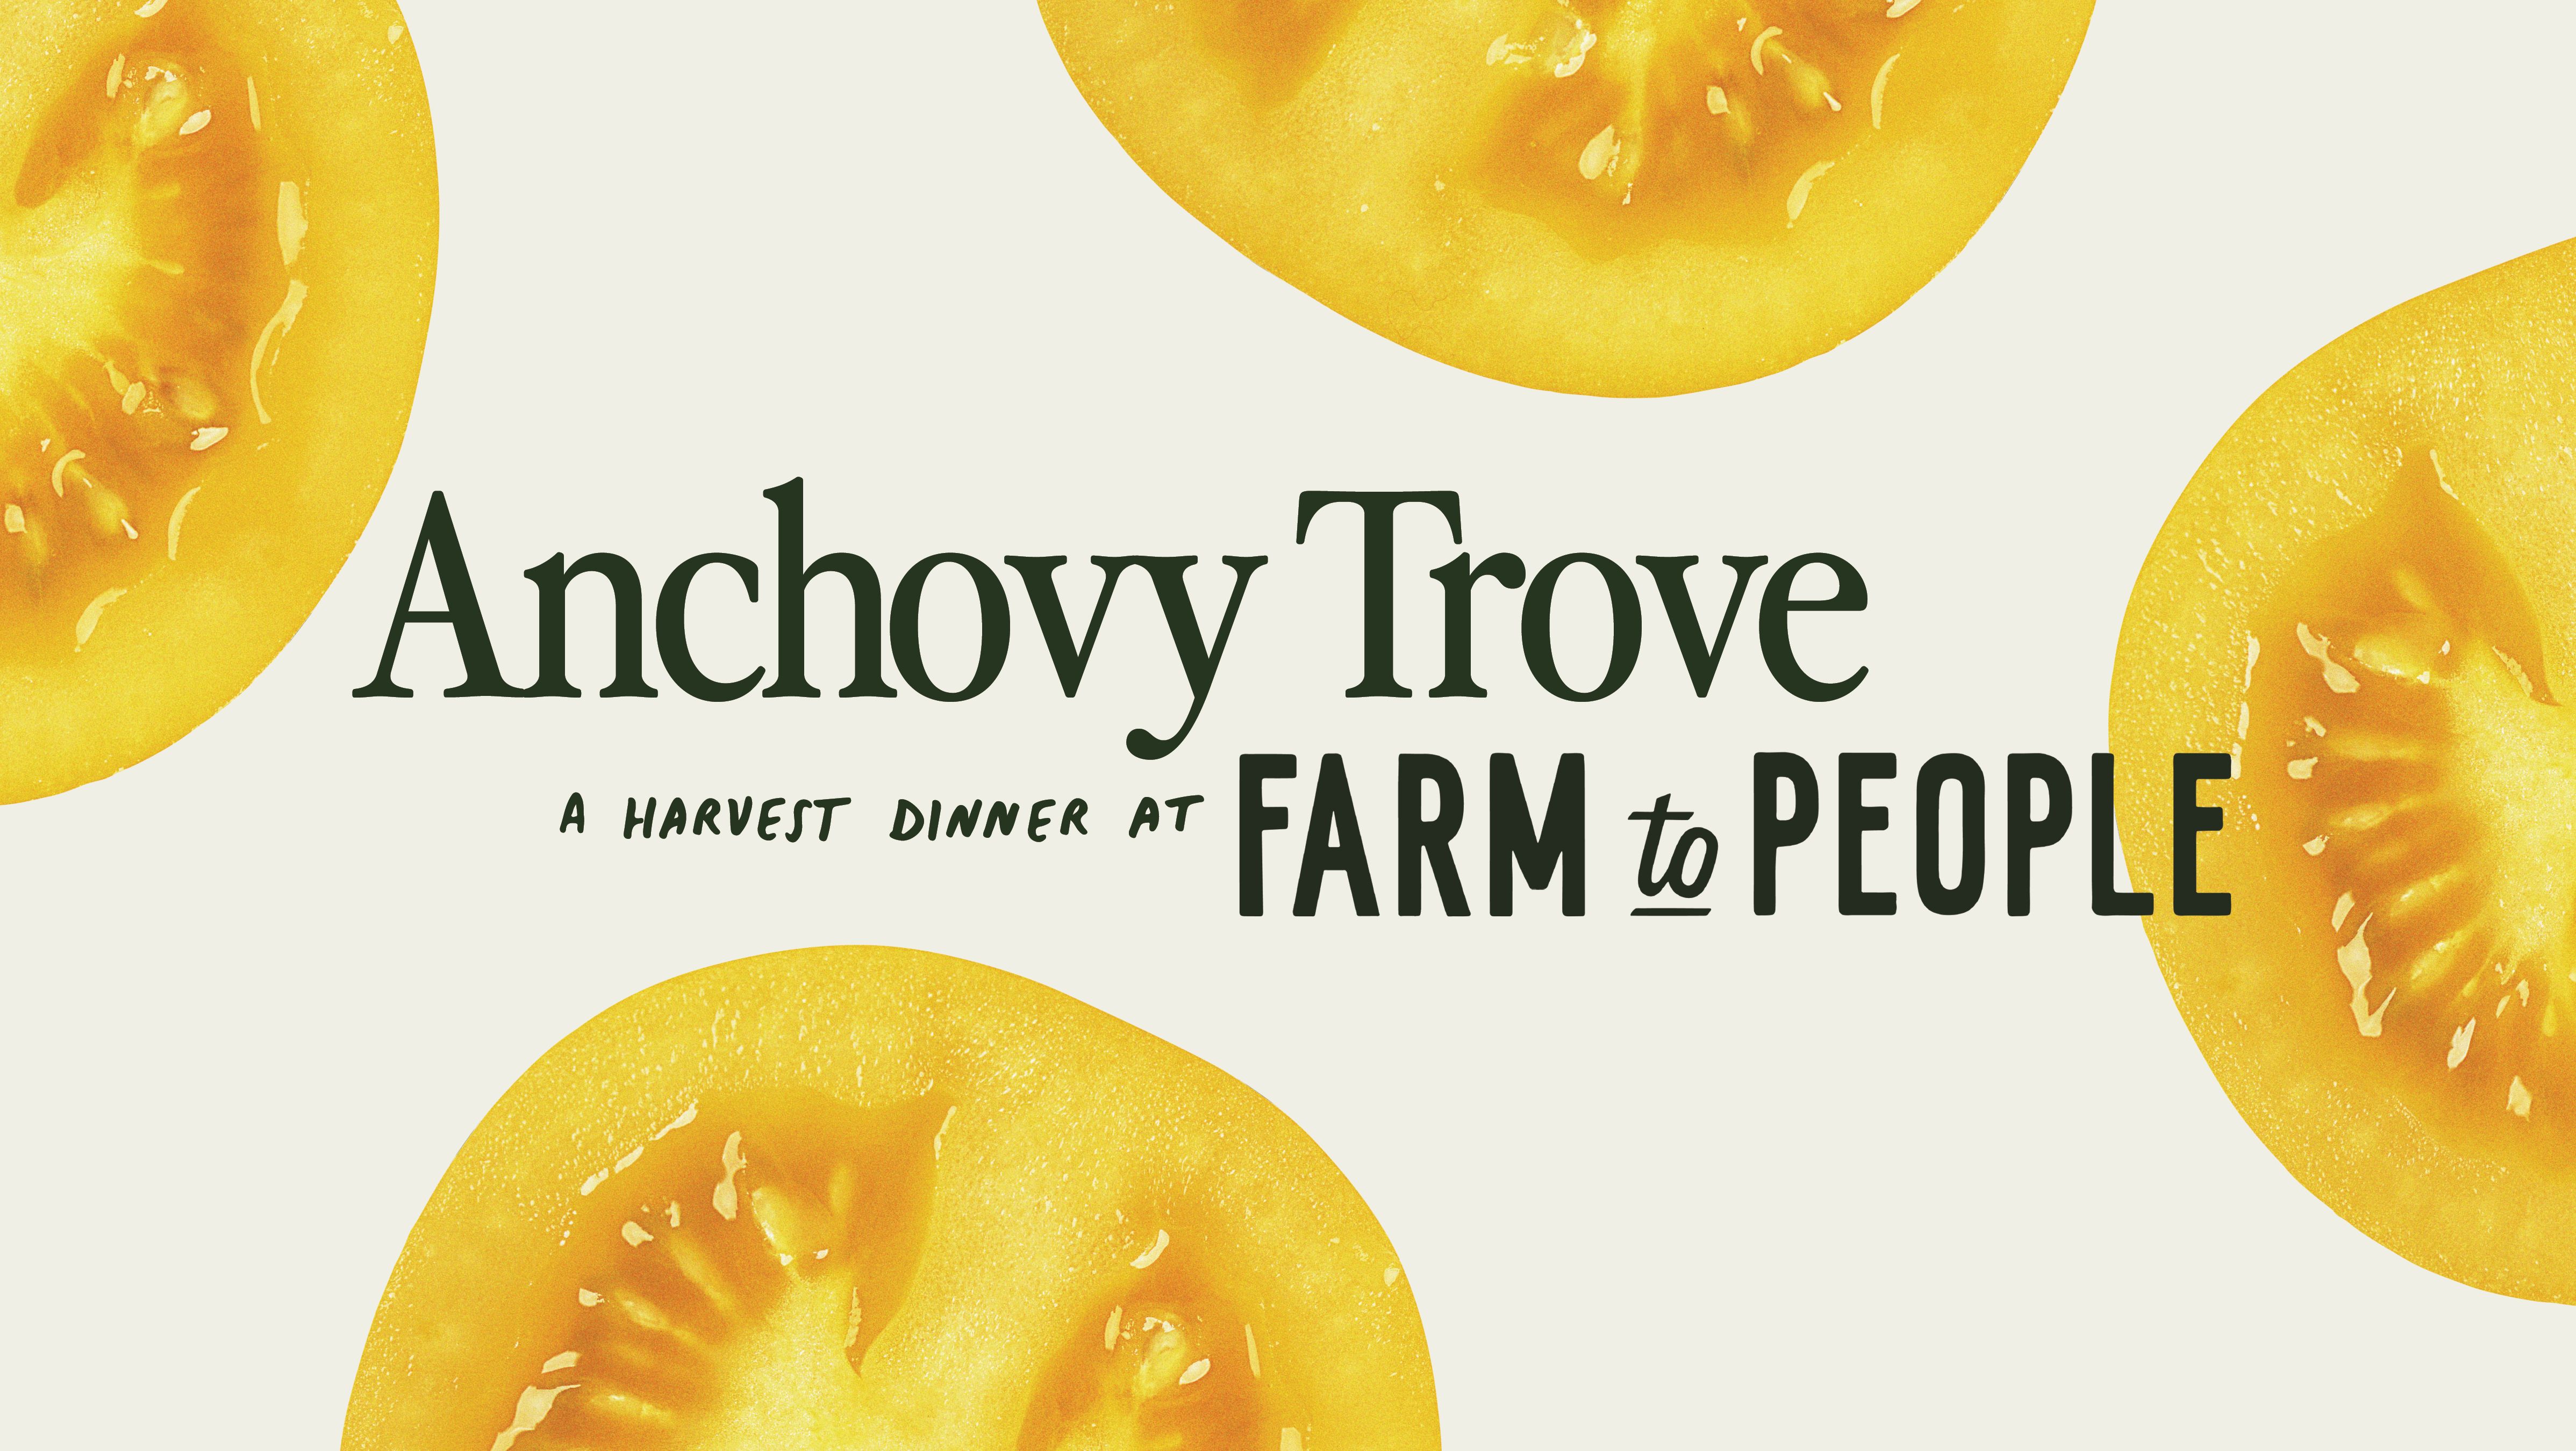 A Harvest Dinner with Farm to People